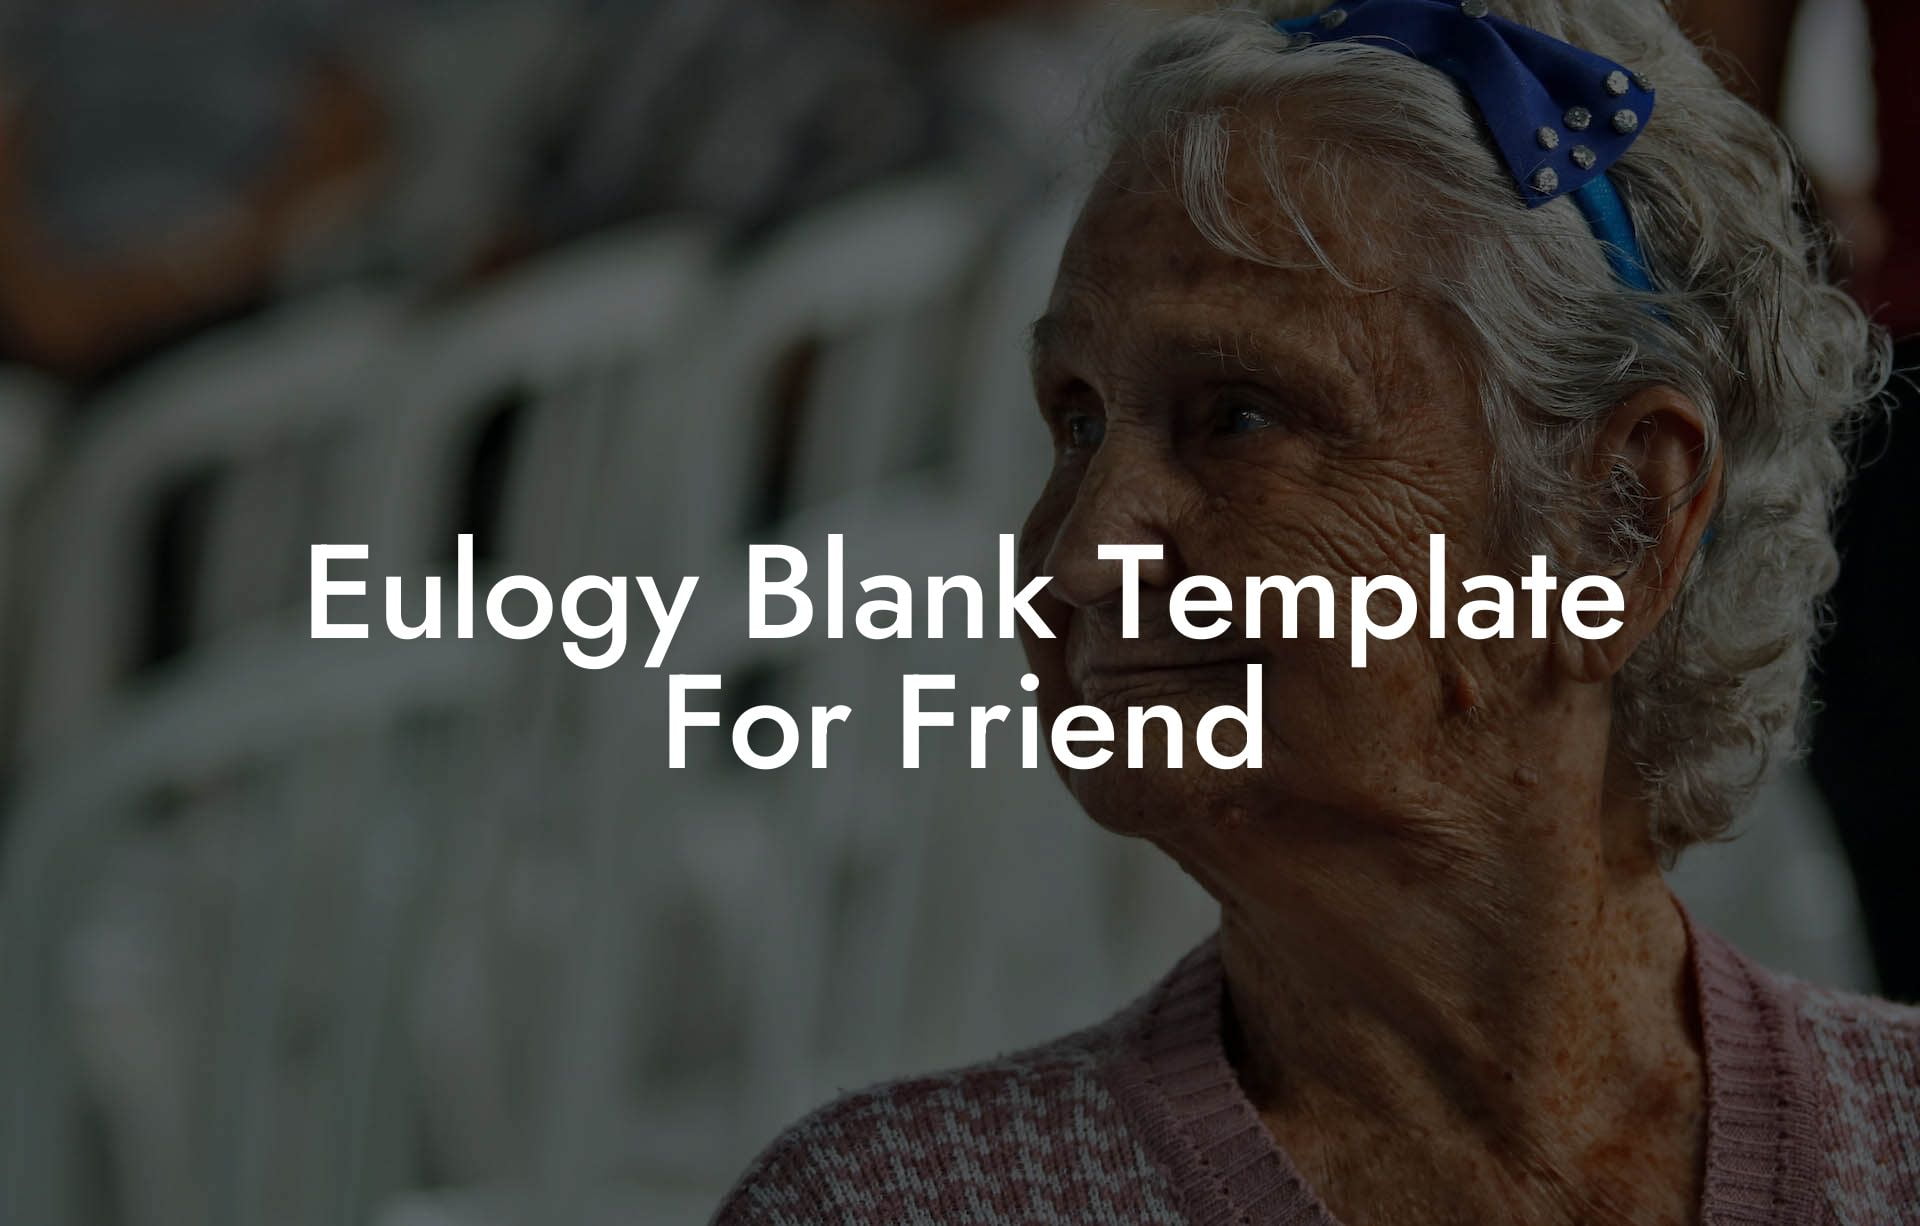 Eulogy Blank Template For Friend